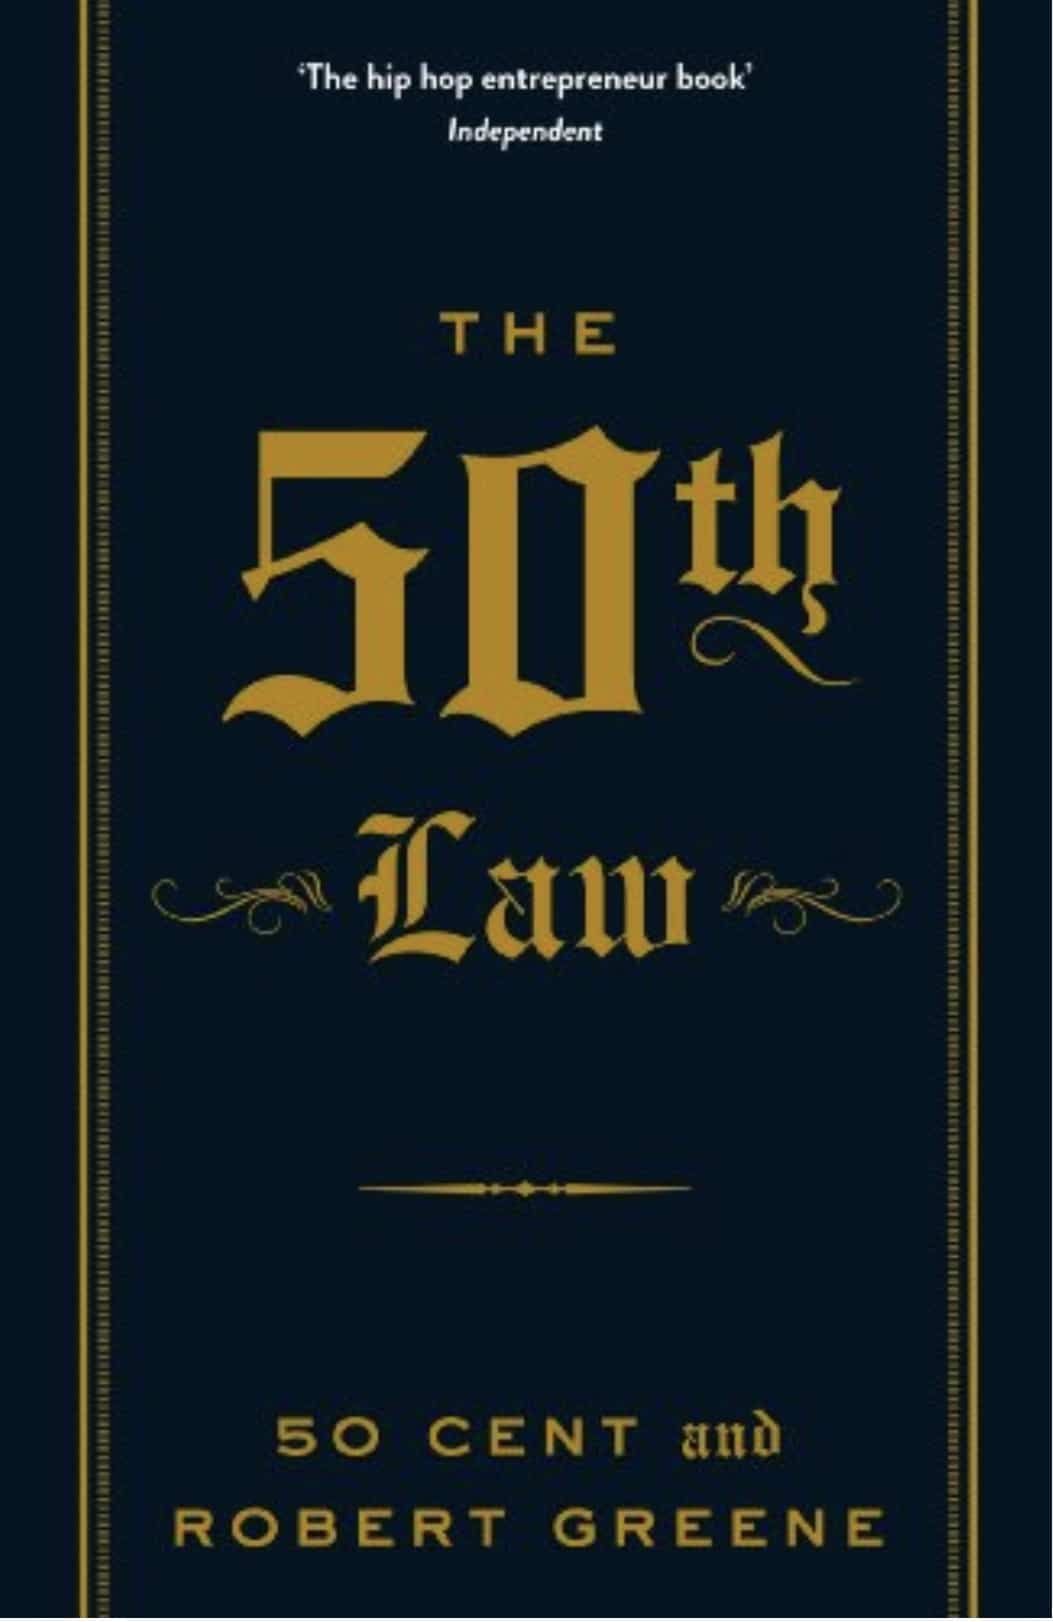 The 50th law 1